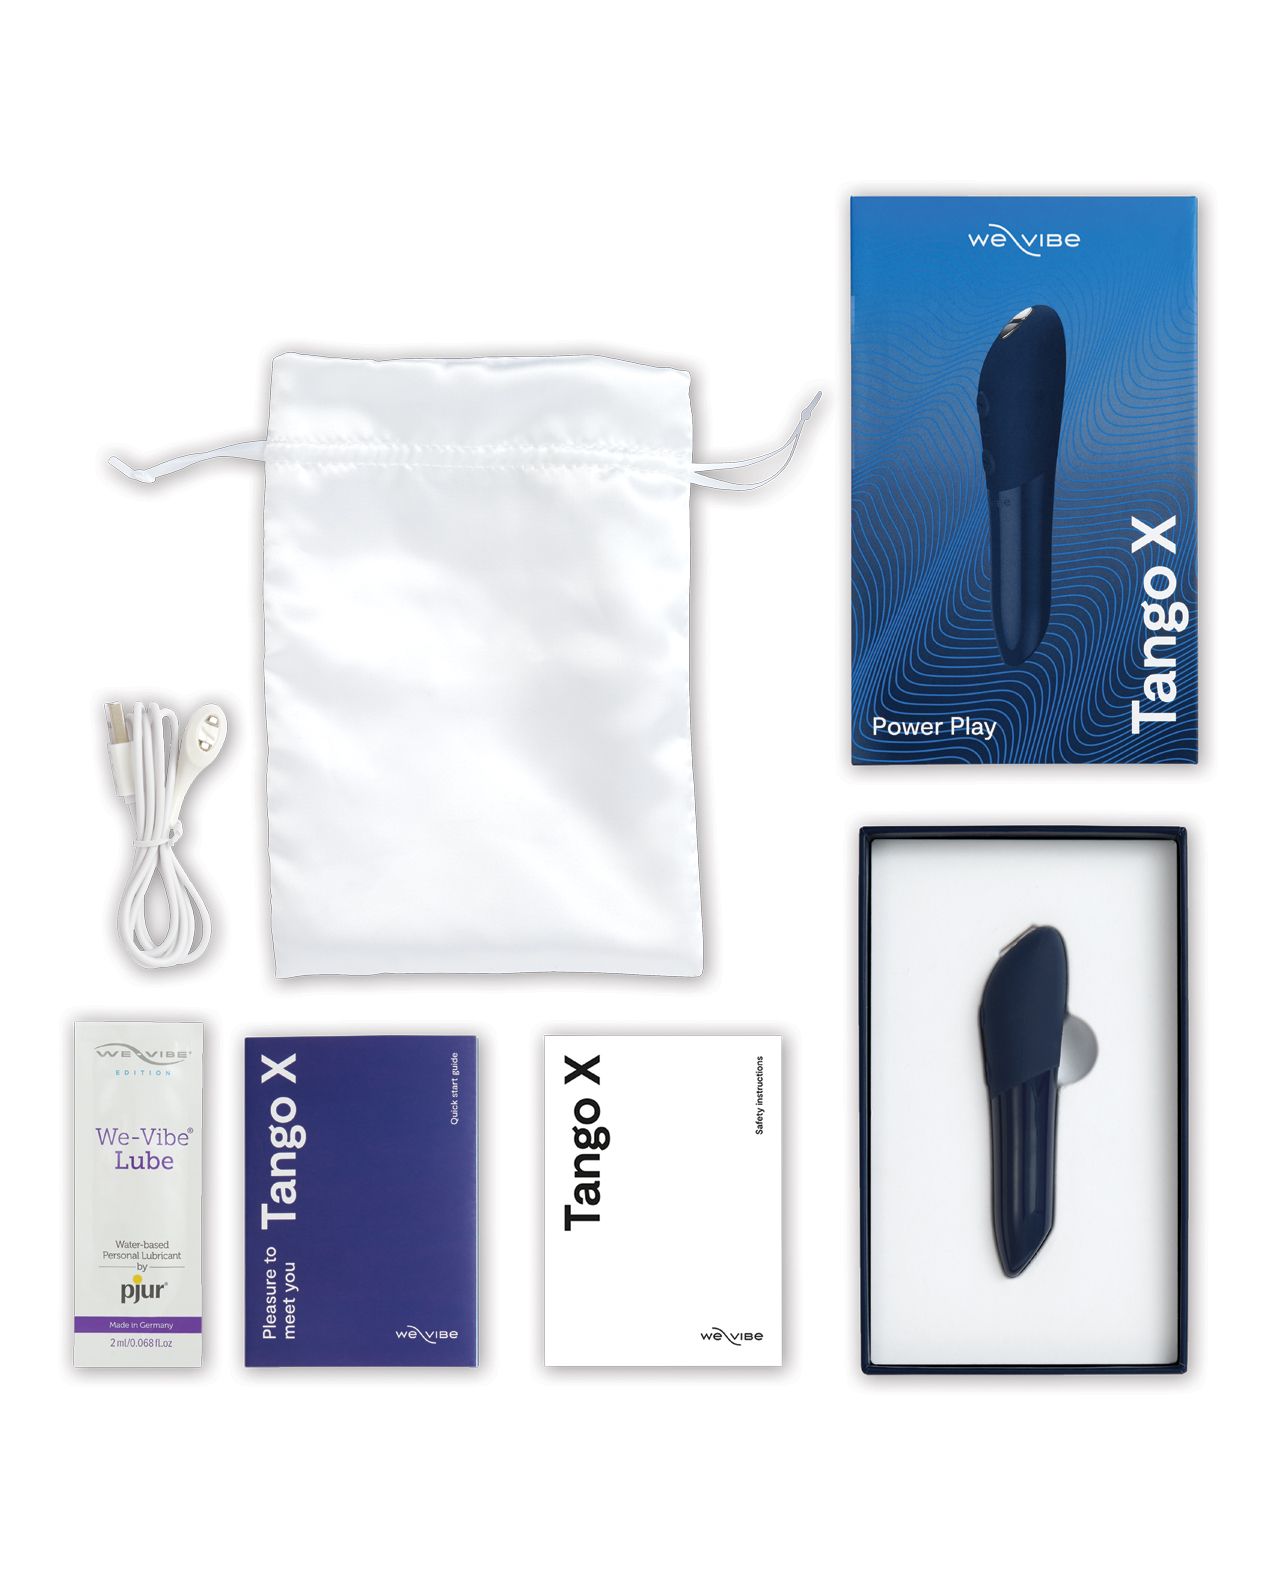 Image shows what comes with the Tango X: vibrator, satin storage bag, magnetic USB charging cord, pjur lube sample, and instruction manual (midnight blue).